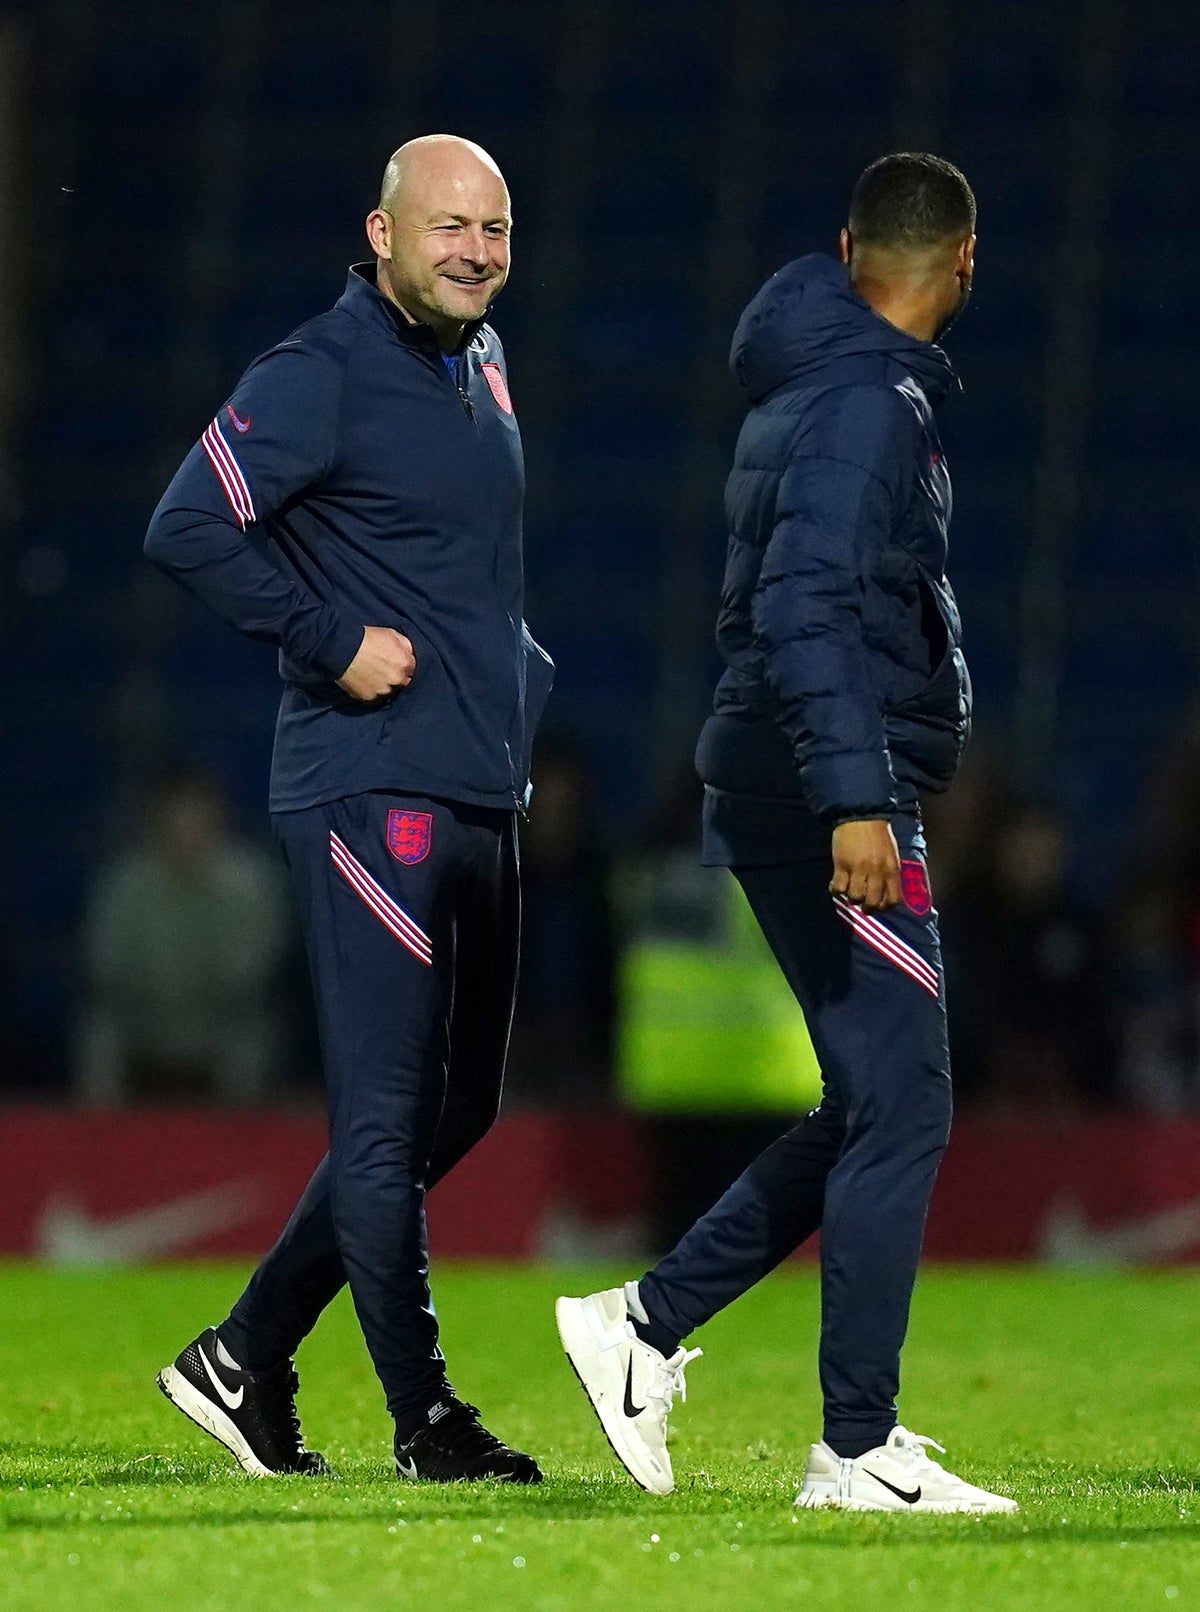 Lee Carsley full of praise for Young Lions as England Under-21s reach Euro 2023